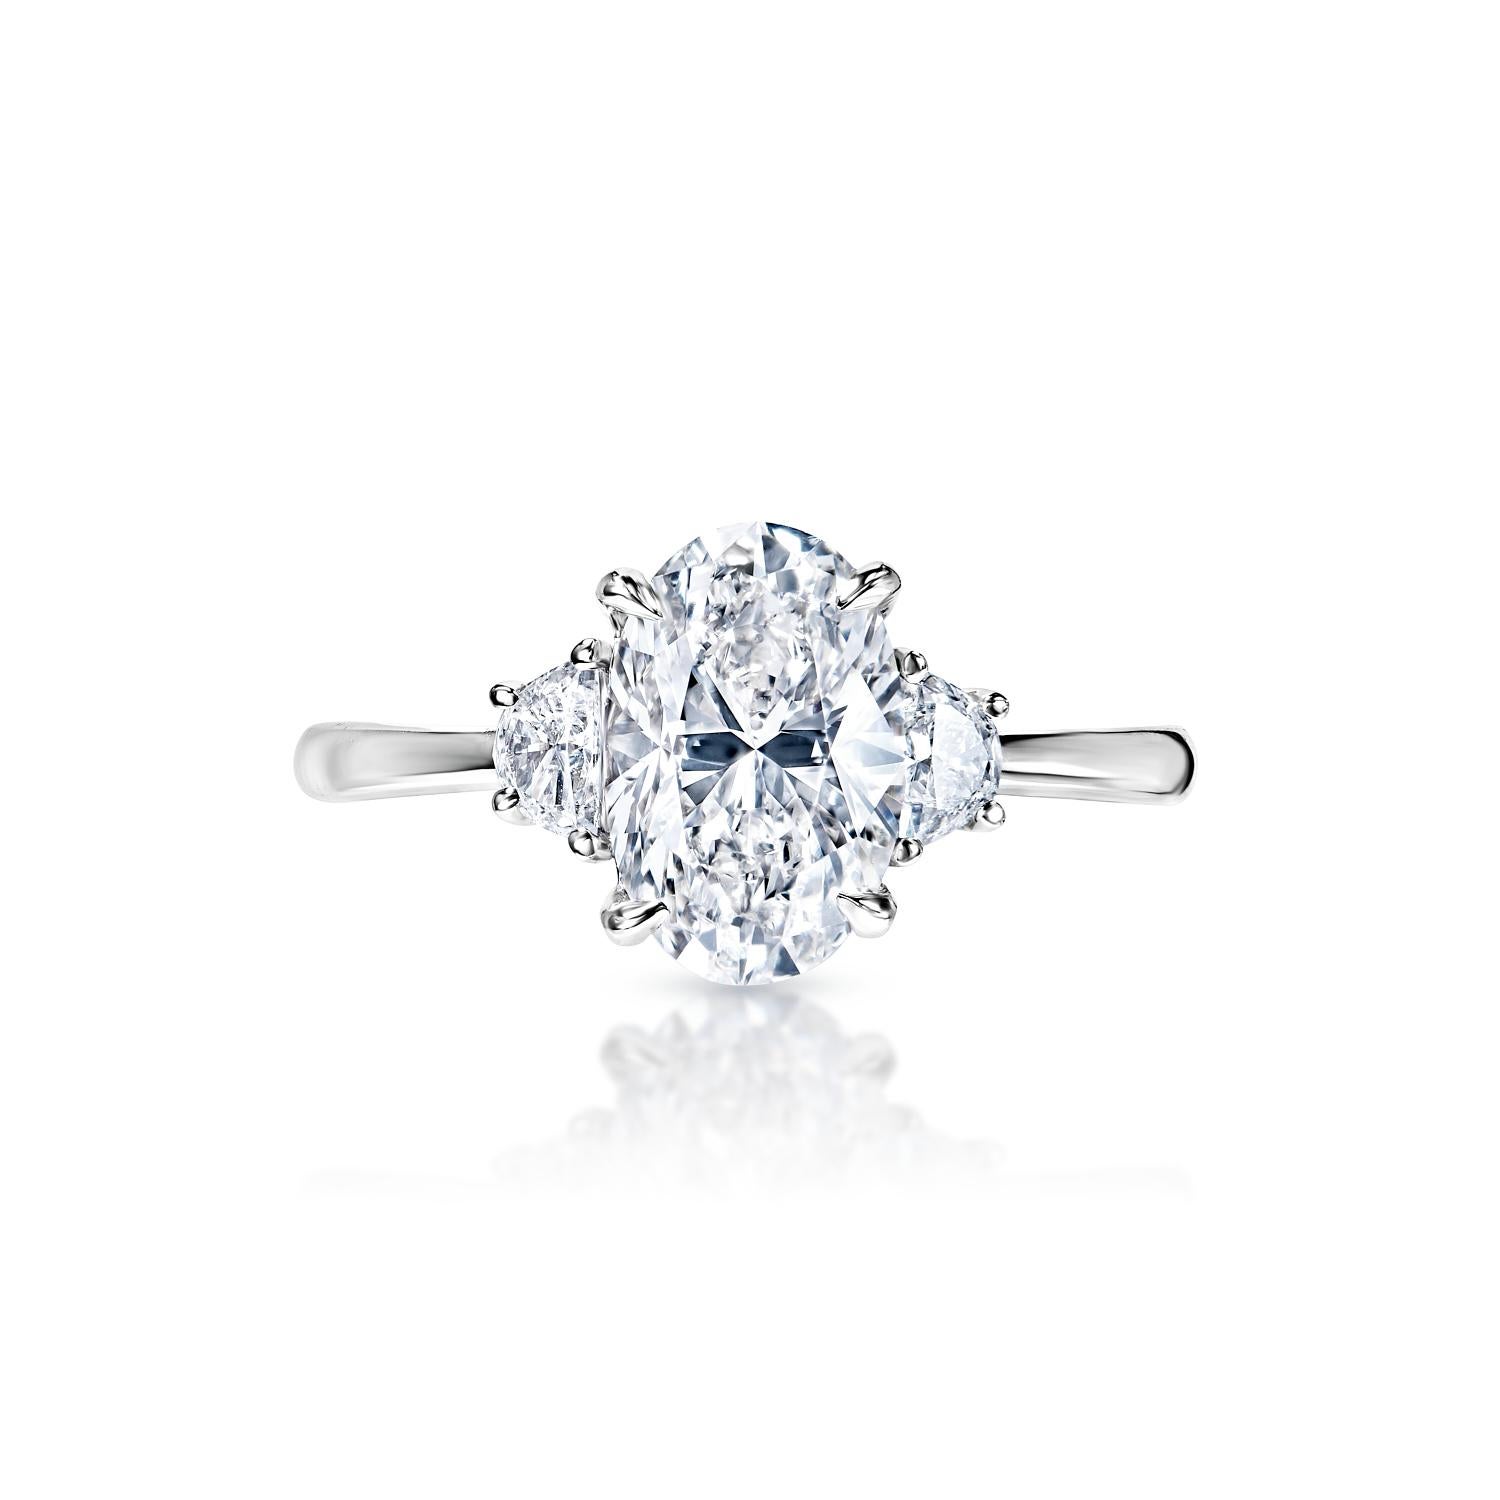 Mckenna 2 Carat G VVS1 Oval Cut Diamond Half Moon Three Stone Engagement Ring in Platinum By Mike Nekta


GIA Certified

Center Diamond:

Carat Weight: 2.00 Carats
Color : G*
Clarity: VVS1
Style: Oval Cut
*Diamond has been treated by one or more